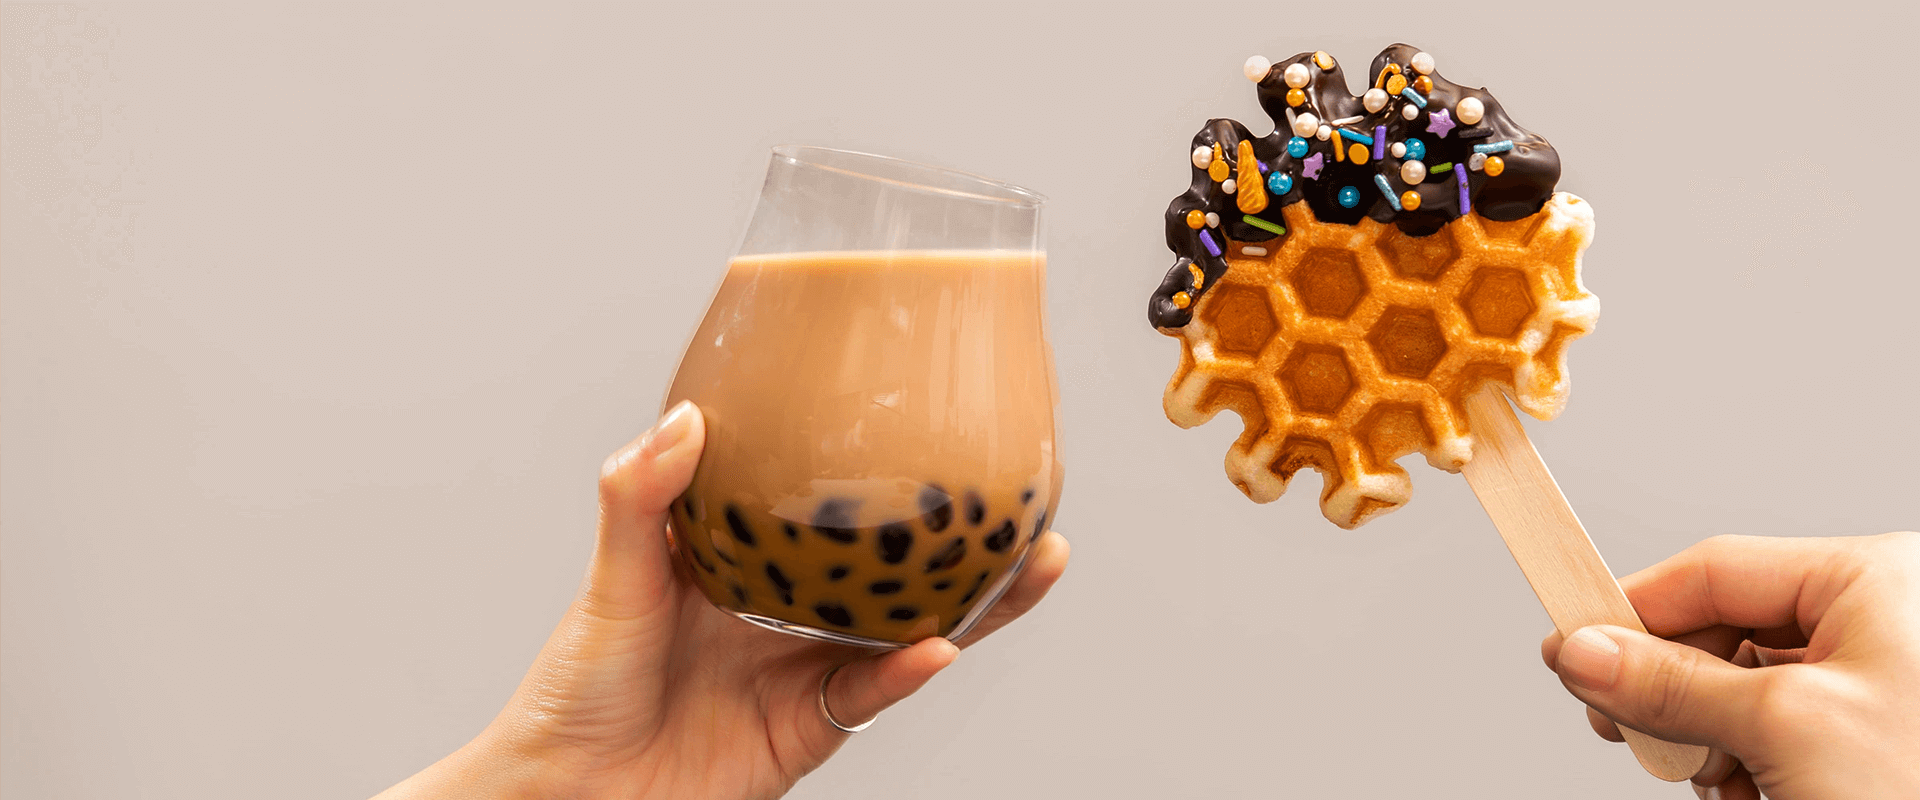 Get A Drink And A Treat, A Match Made In Dessert Heaven